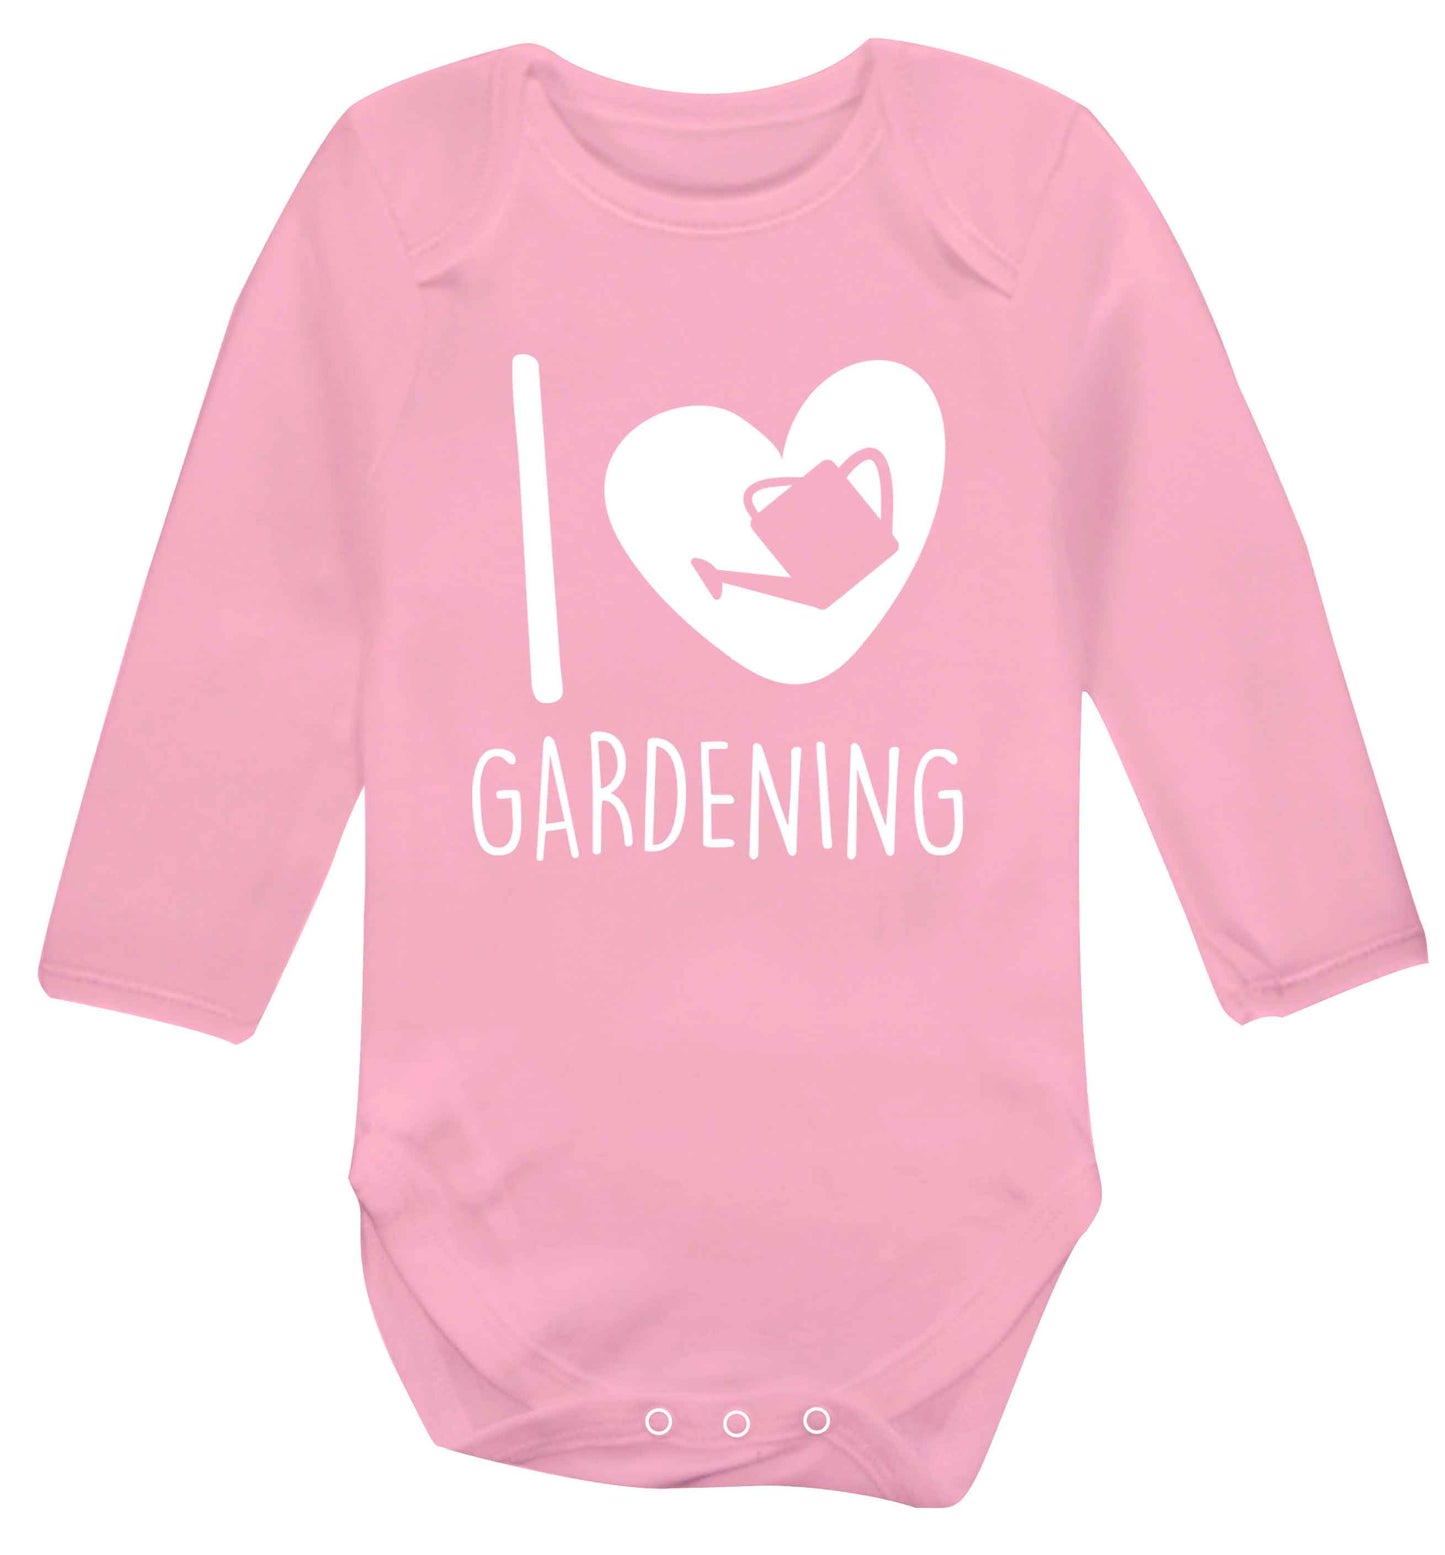 I love gardening Baby Vest long sleeved pale pink 6-12 months